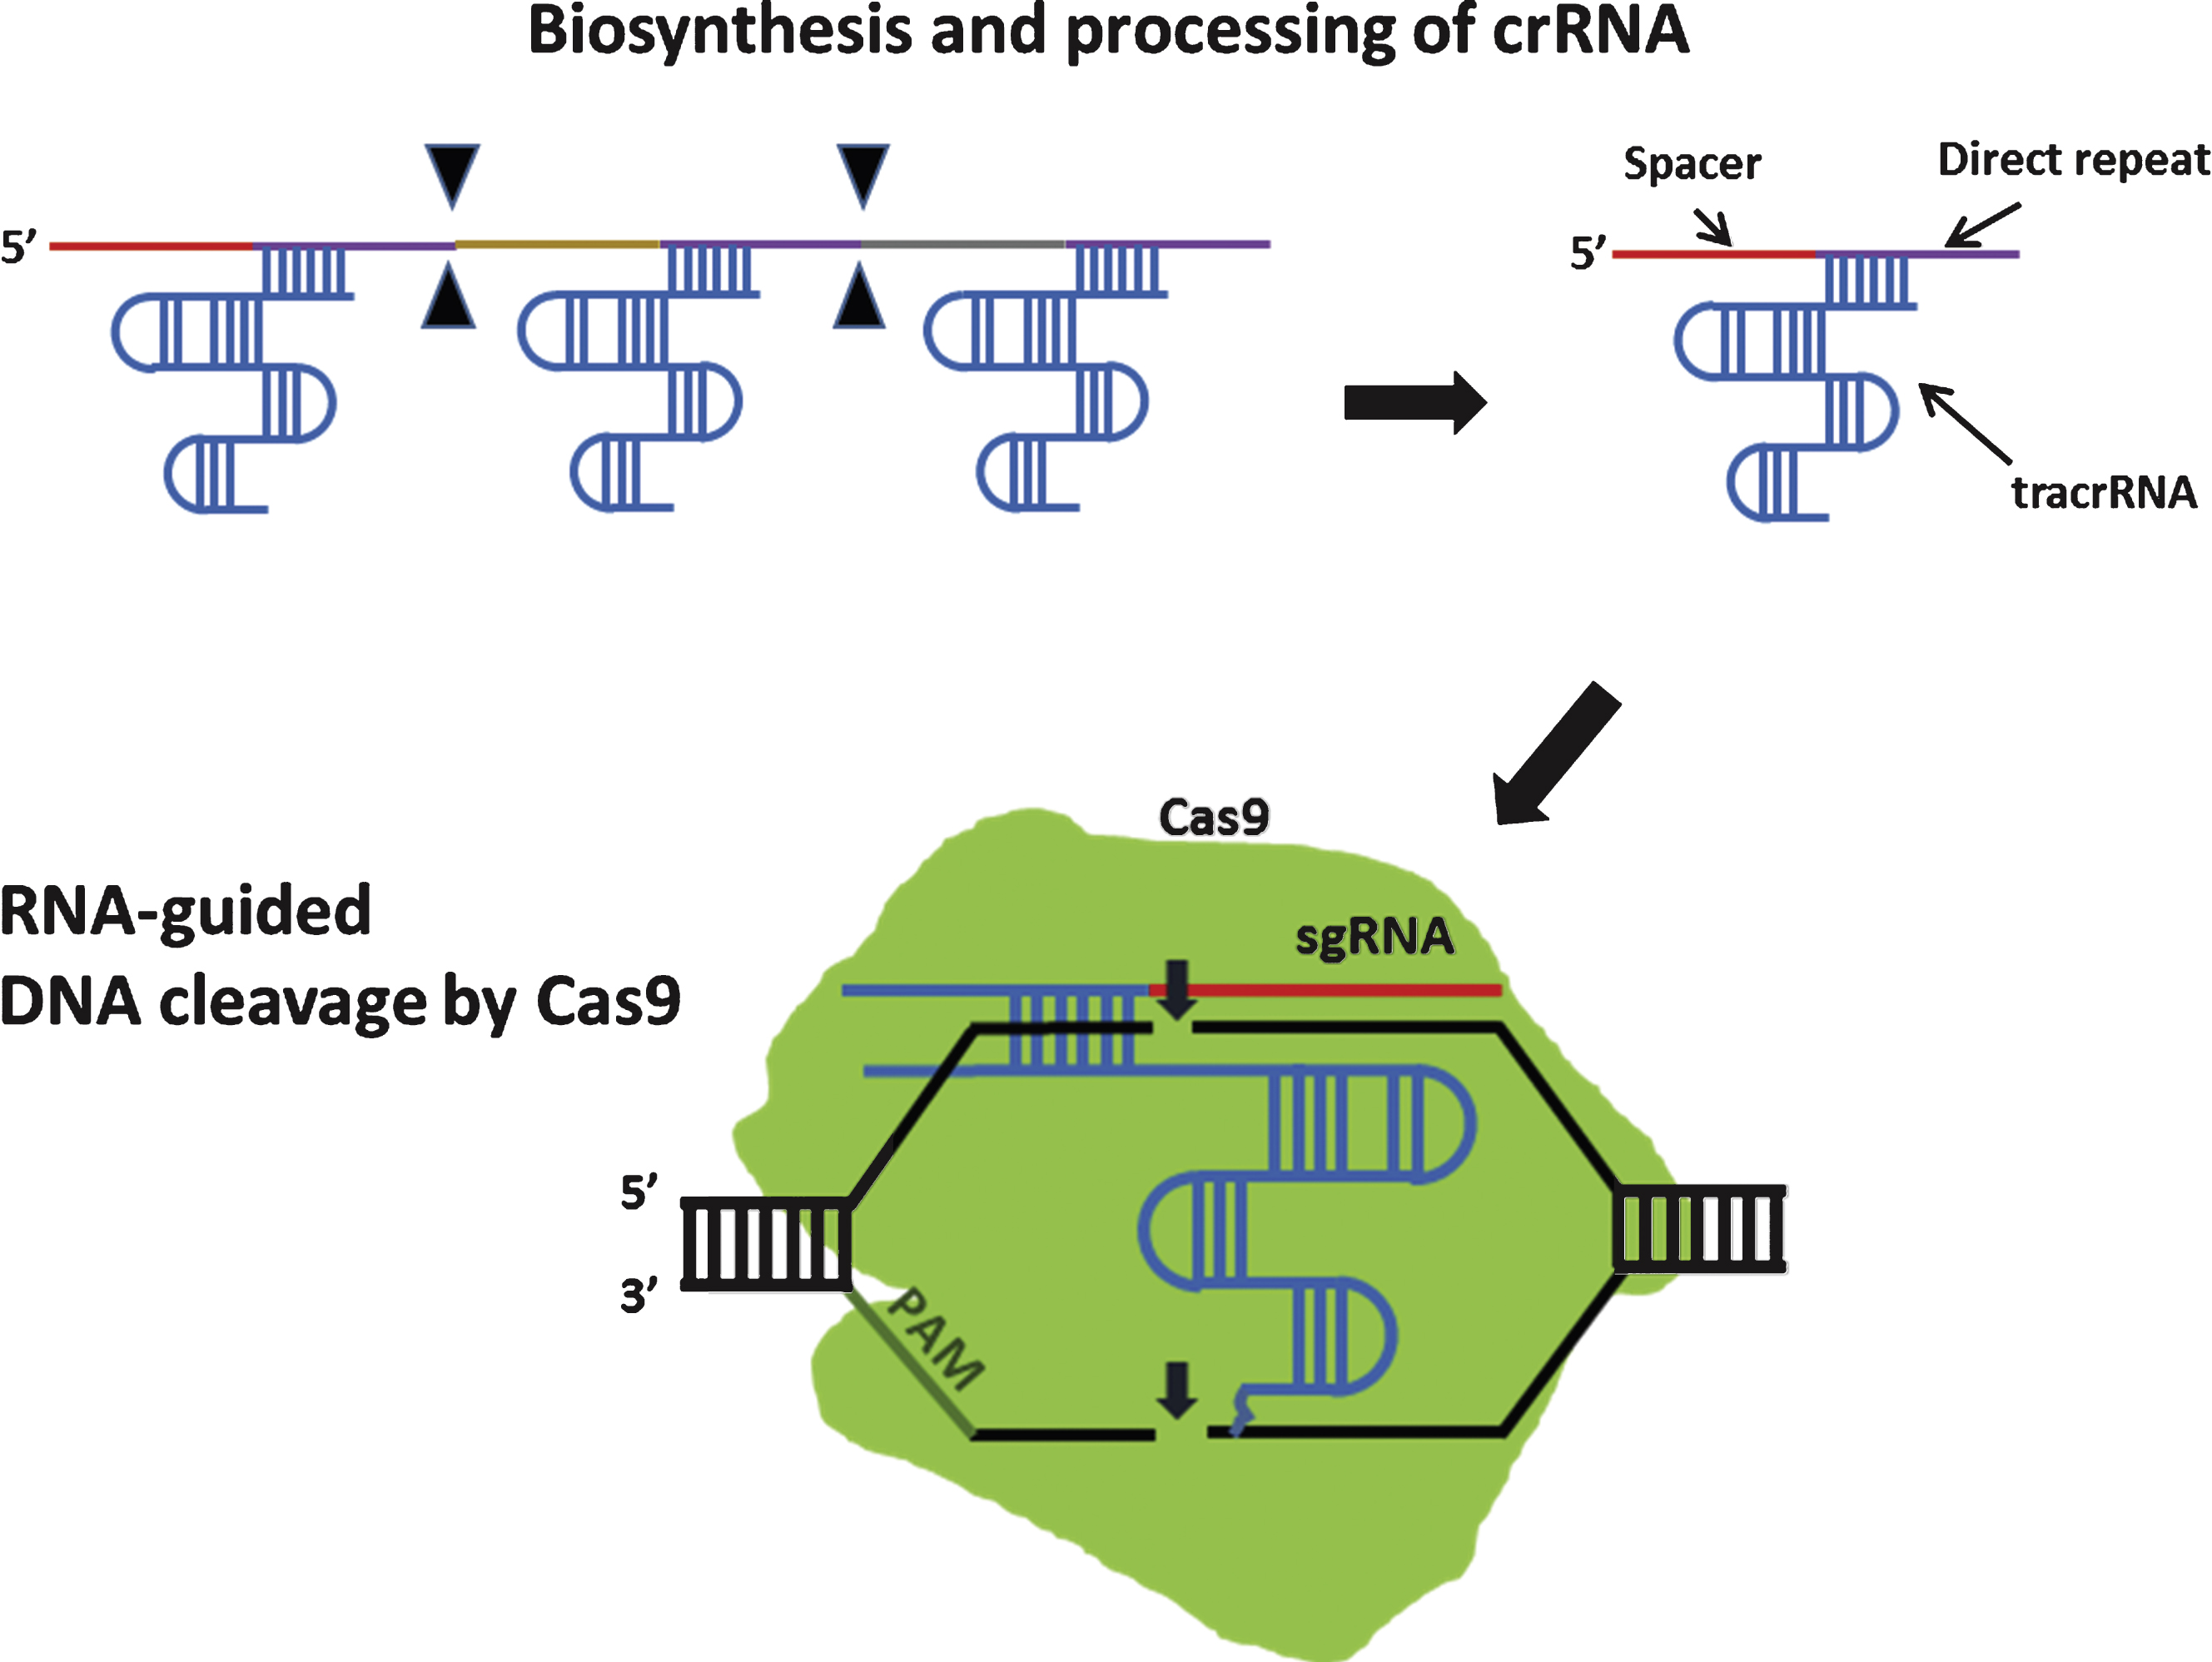 DNA cleavage by type II CRISPR nuclease system. In type II CRISPR, crRNA-tracrRNA hybrids complex with Cas9 to facilitate sequence-specific DNA cleavage. Filled triangle indicates cleavage by Cas ribonucleases. Small arrows indicate DNA cleavage by Cas9. sgRNA: single guide RNA.